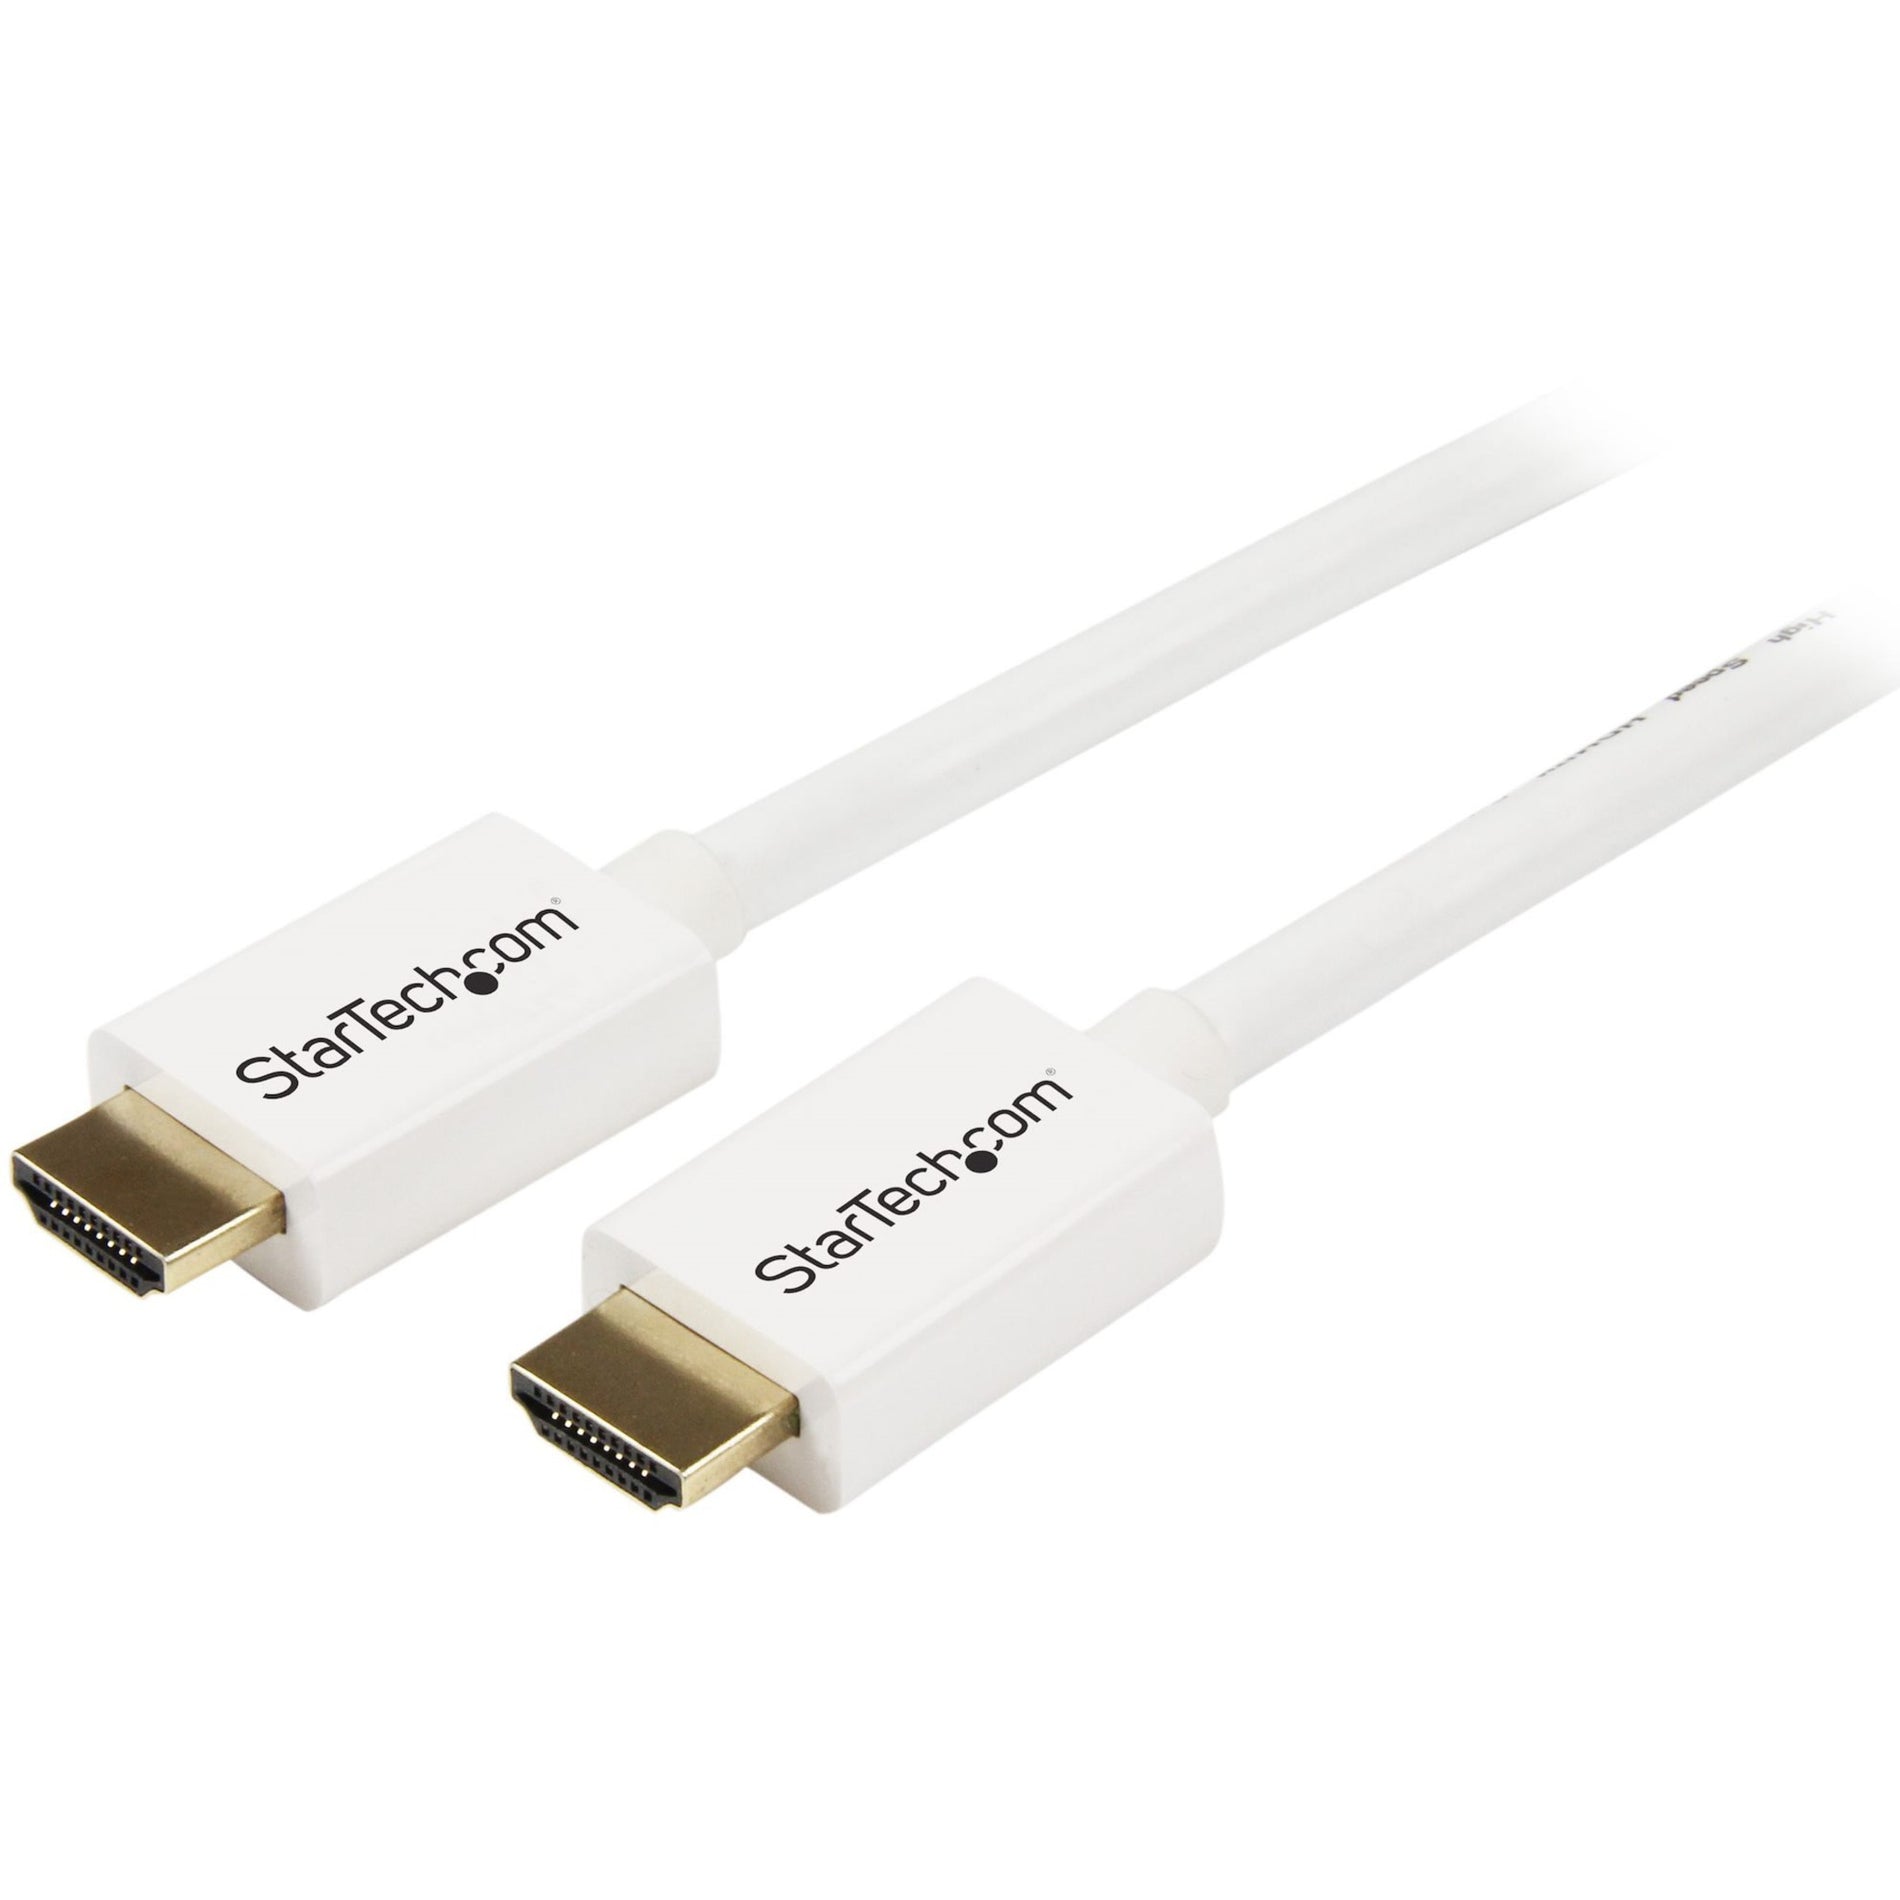 StarTech.com HD3MM5MW 5m (16 ft) White CL3 In-wall High Speed HDMI Cable - HDMI to HDMI - M/M, Corrosion-free, 10.2 Gbit/s Data Transfer Rate